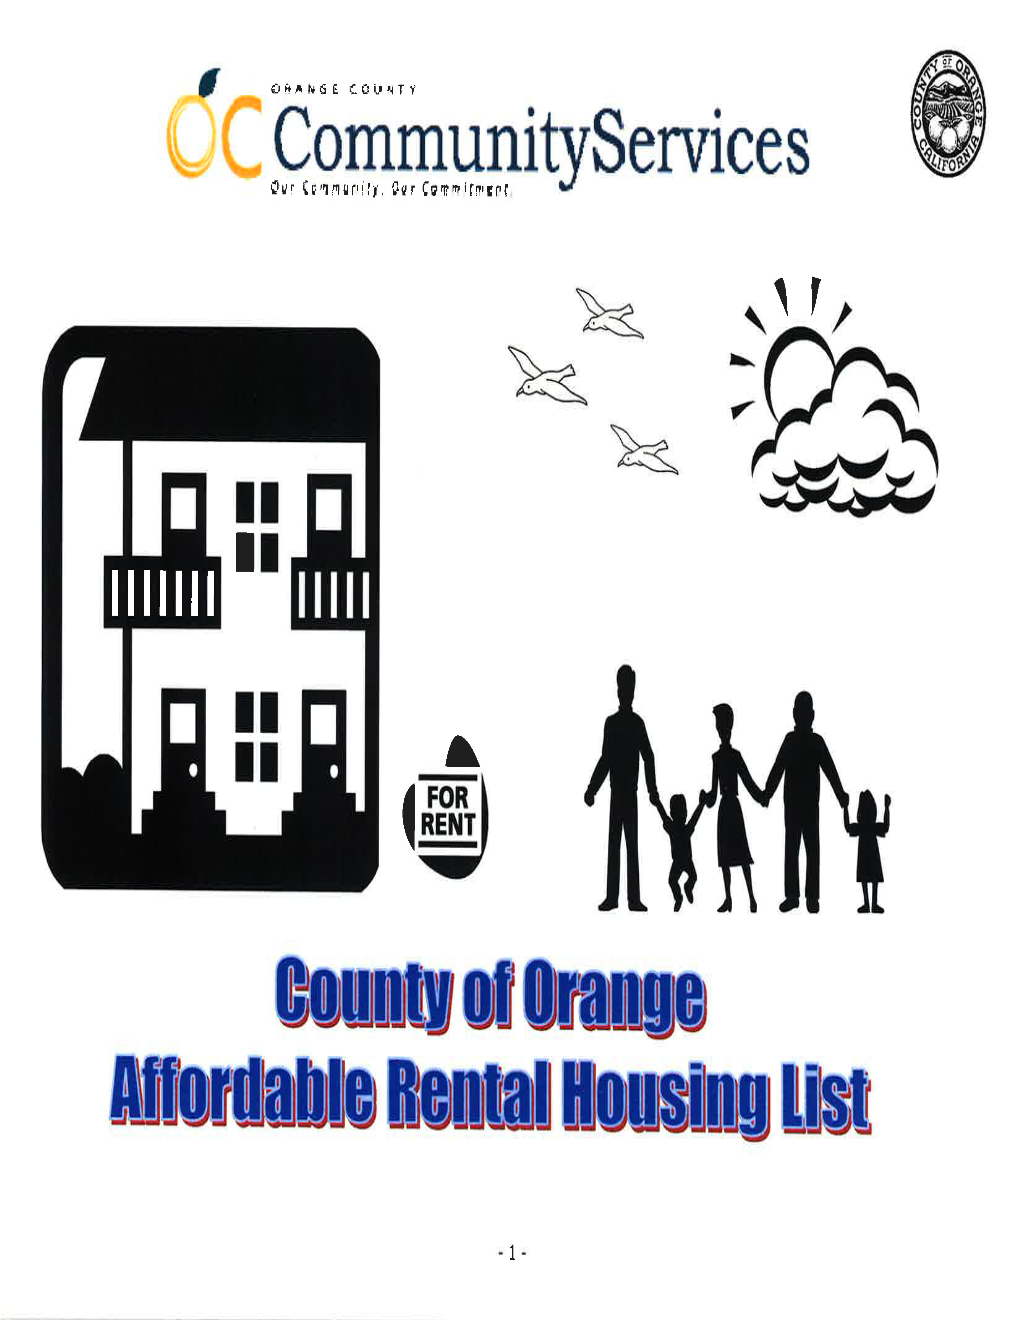 Affordable Housing List